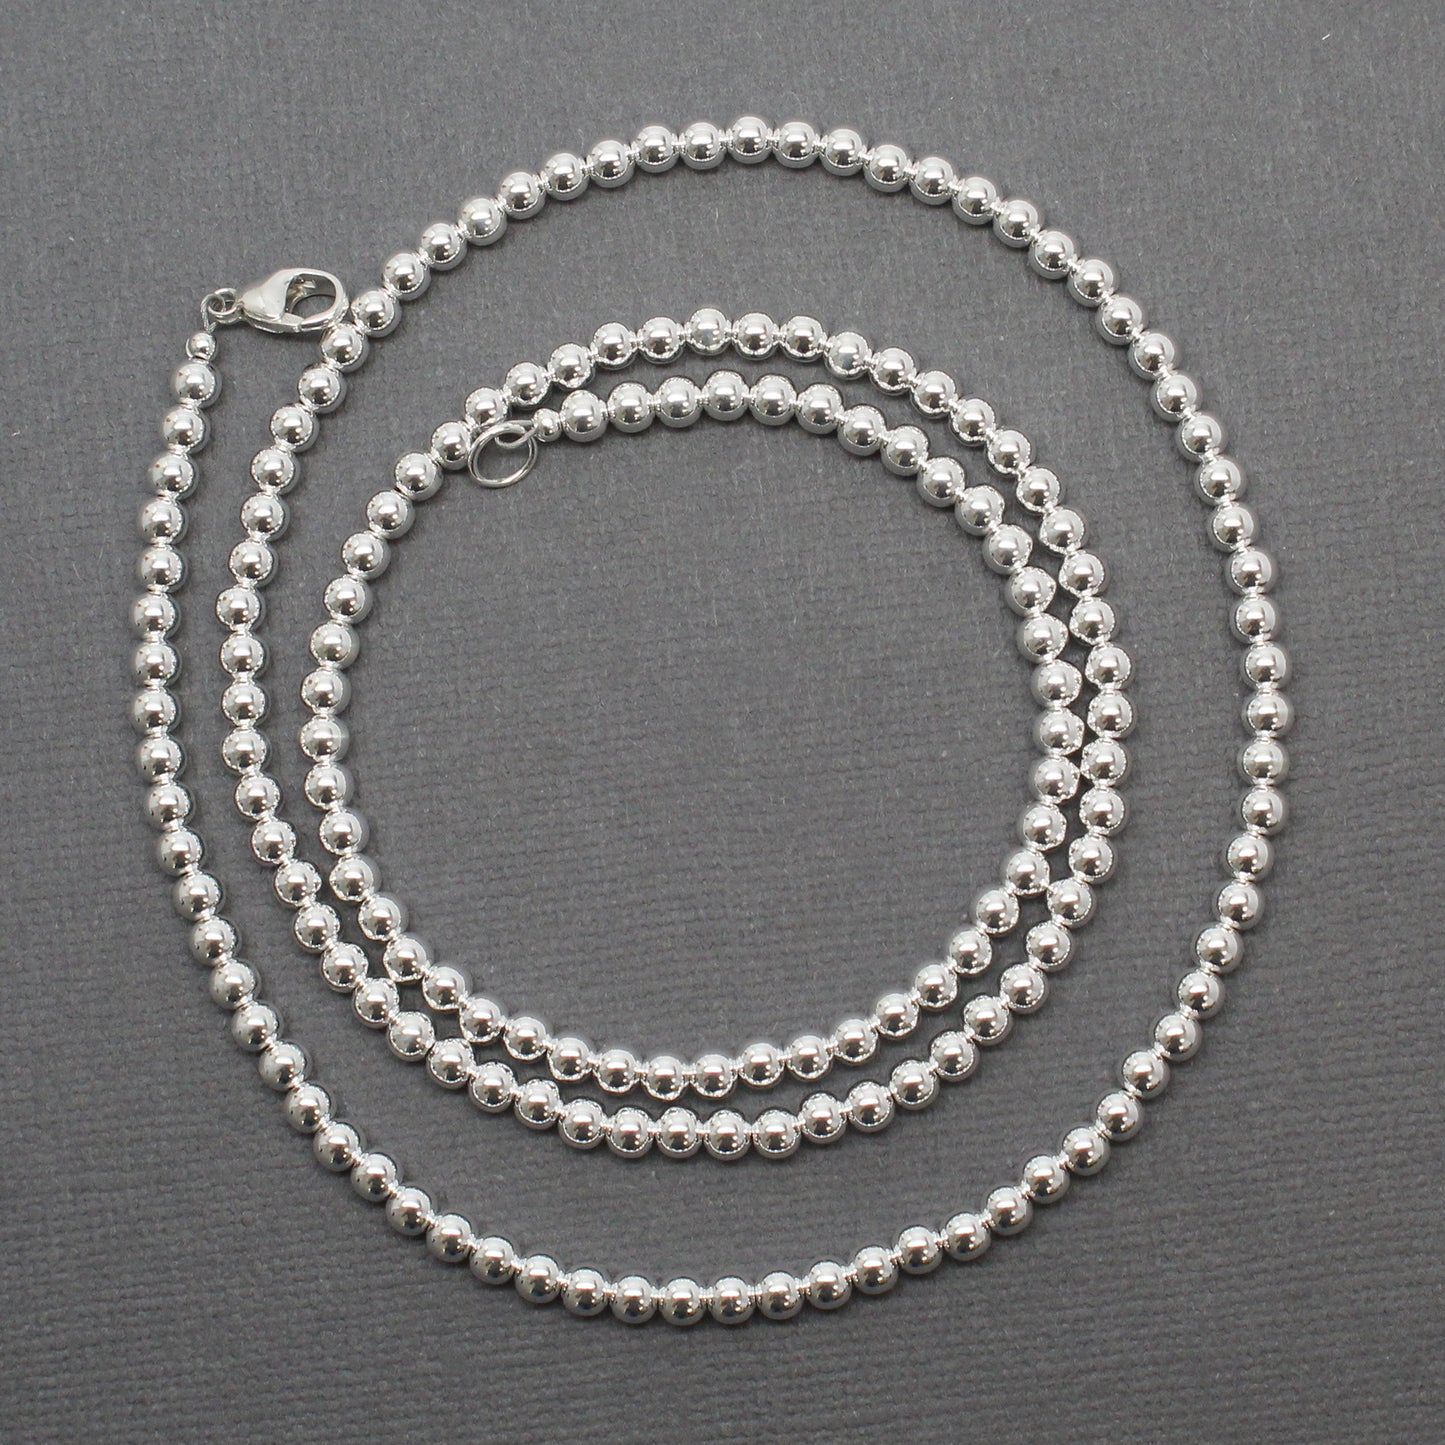 4mm Sterling Silver Bead Necklace, 4mm Silver Bead Choker Necklace,  Everyday Silver Necklace, 4mm Silver Bead Strand, Layer Necklace -   Norway